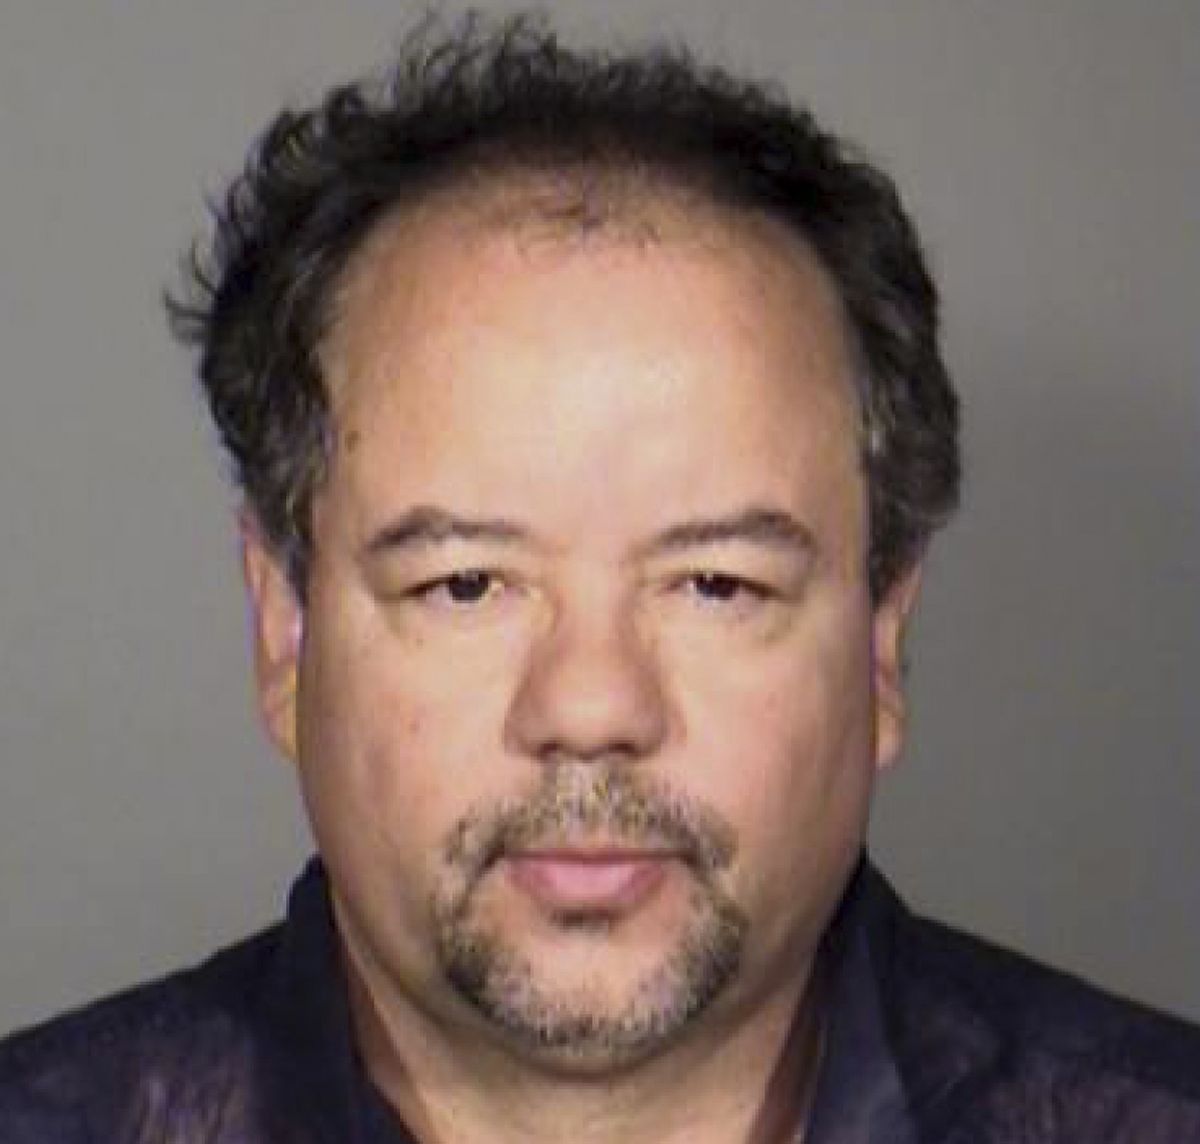 This undated photo released by the Cleveland Police Department shows Ariel Castro. Three women who disappeared in Cleveland a decade ago were found safe Monday, and police arrested three brothers, including Castro, accused of holding the victims against their will. (AP Photo/Cleveland Police Department)    (AP/Cleveland Police Department)